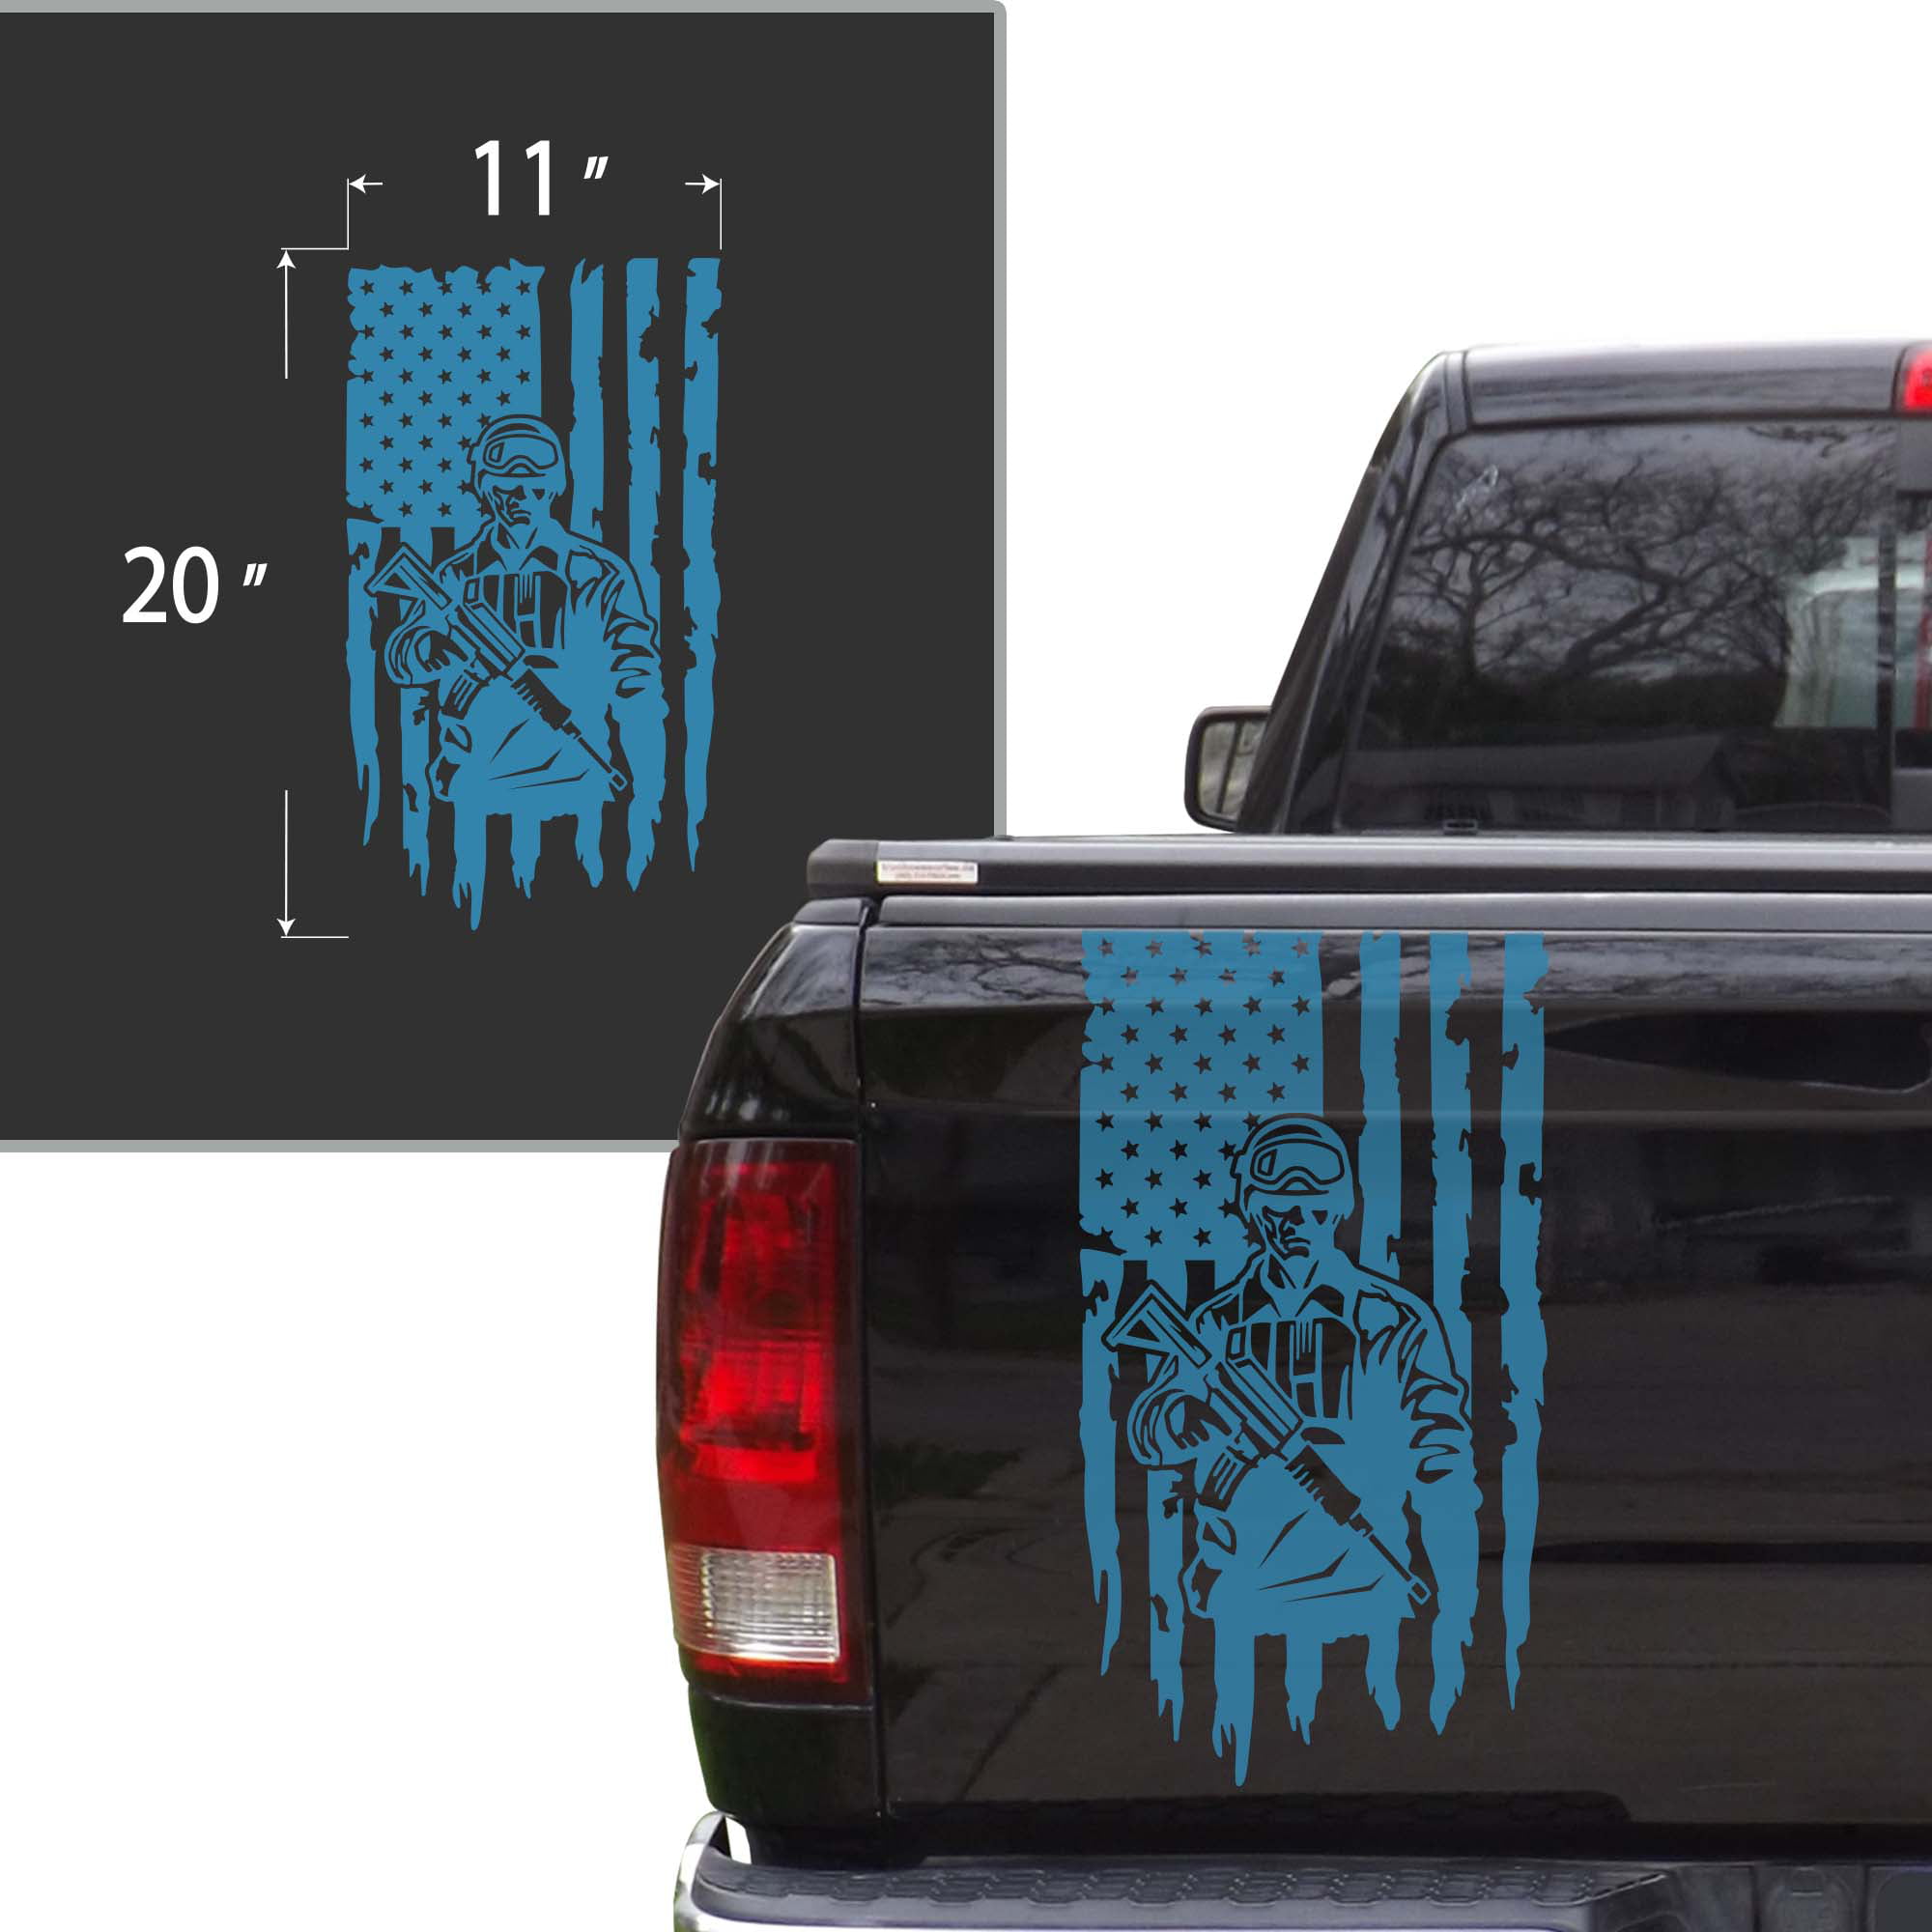 Soldier Enlisted Man Fighter U.S. Army USMC USAF Distressed American USA US  Flag Truck Tailgate Vinyl Decal Fits most Pickup Trucks Military Sticker  Veteran Retired (11 x 20, Ice Blue) 